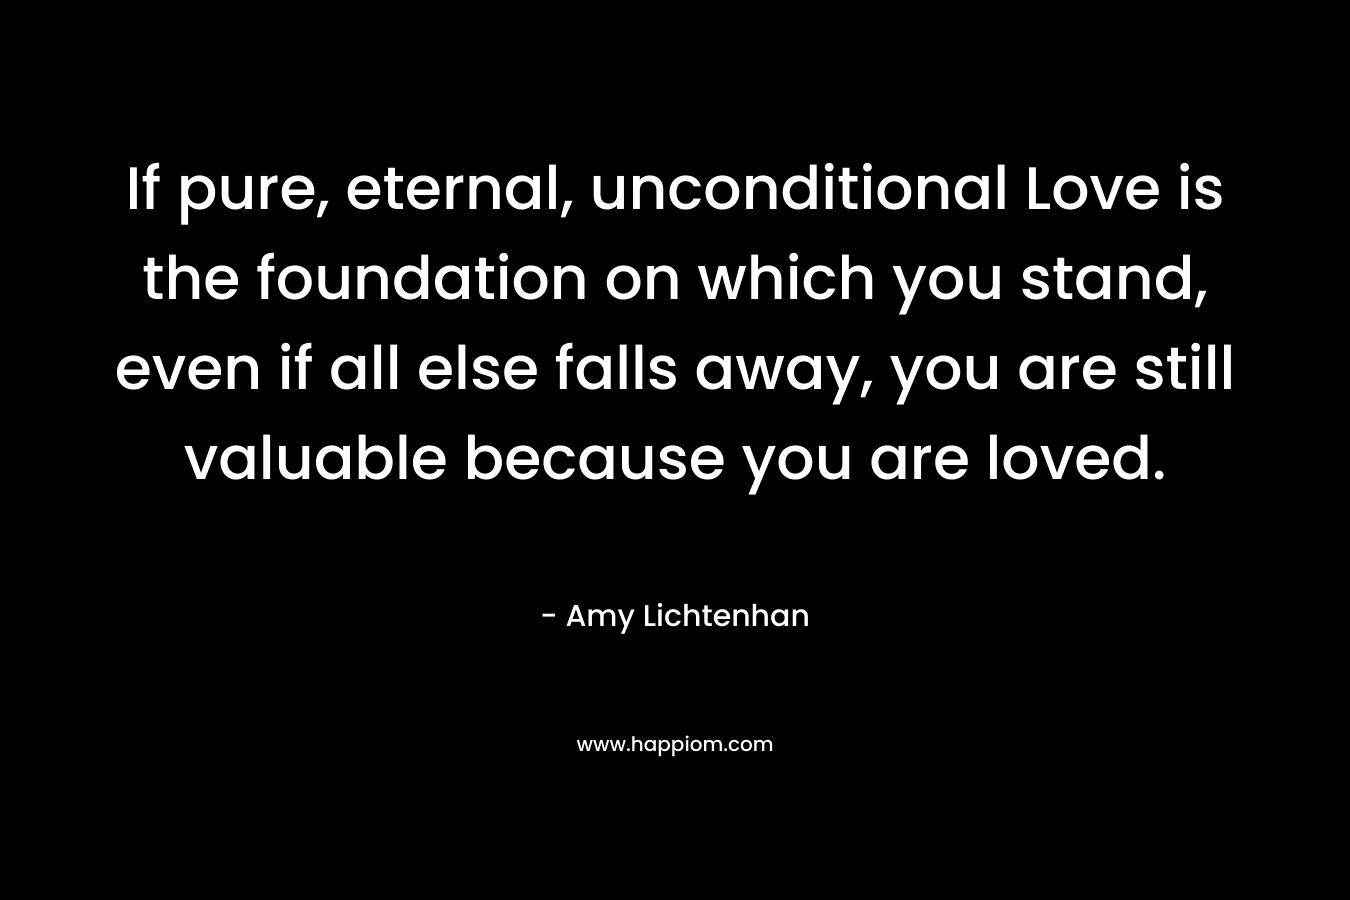 If pure, eternal, unconditional Love is the foundation on which you stand, even if all else falls away, you are still valuable because you are loved.